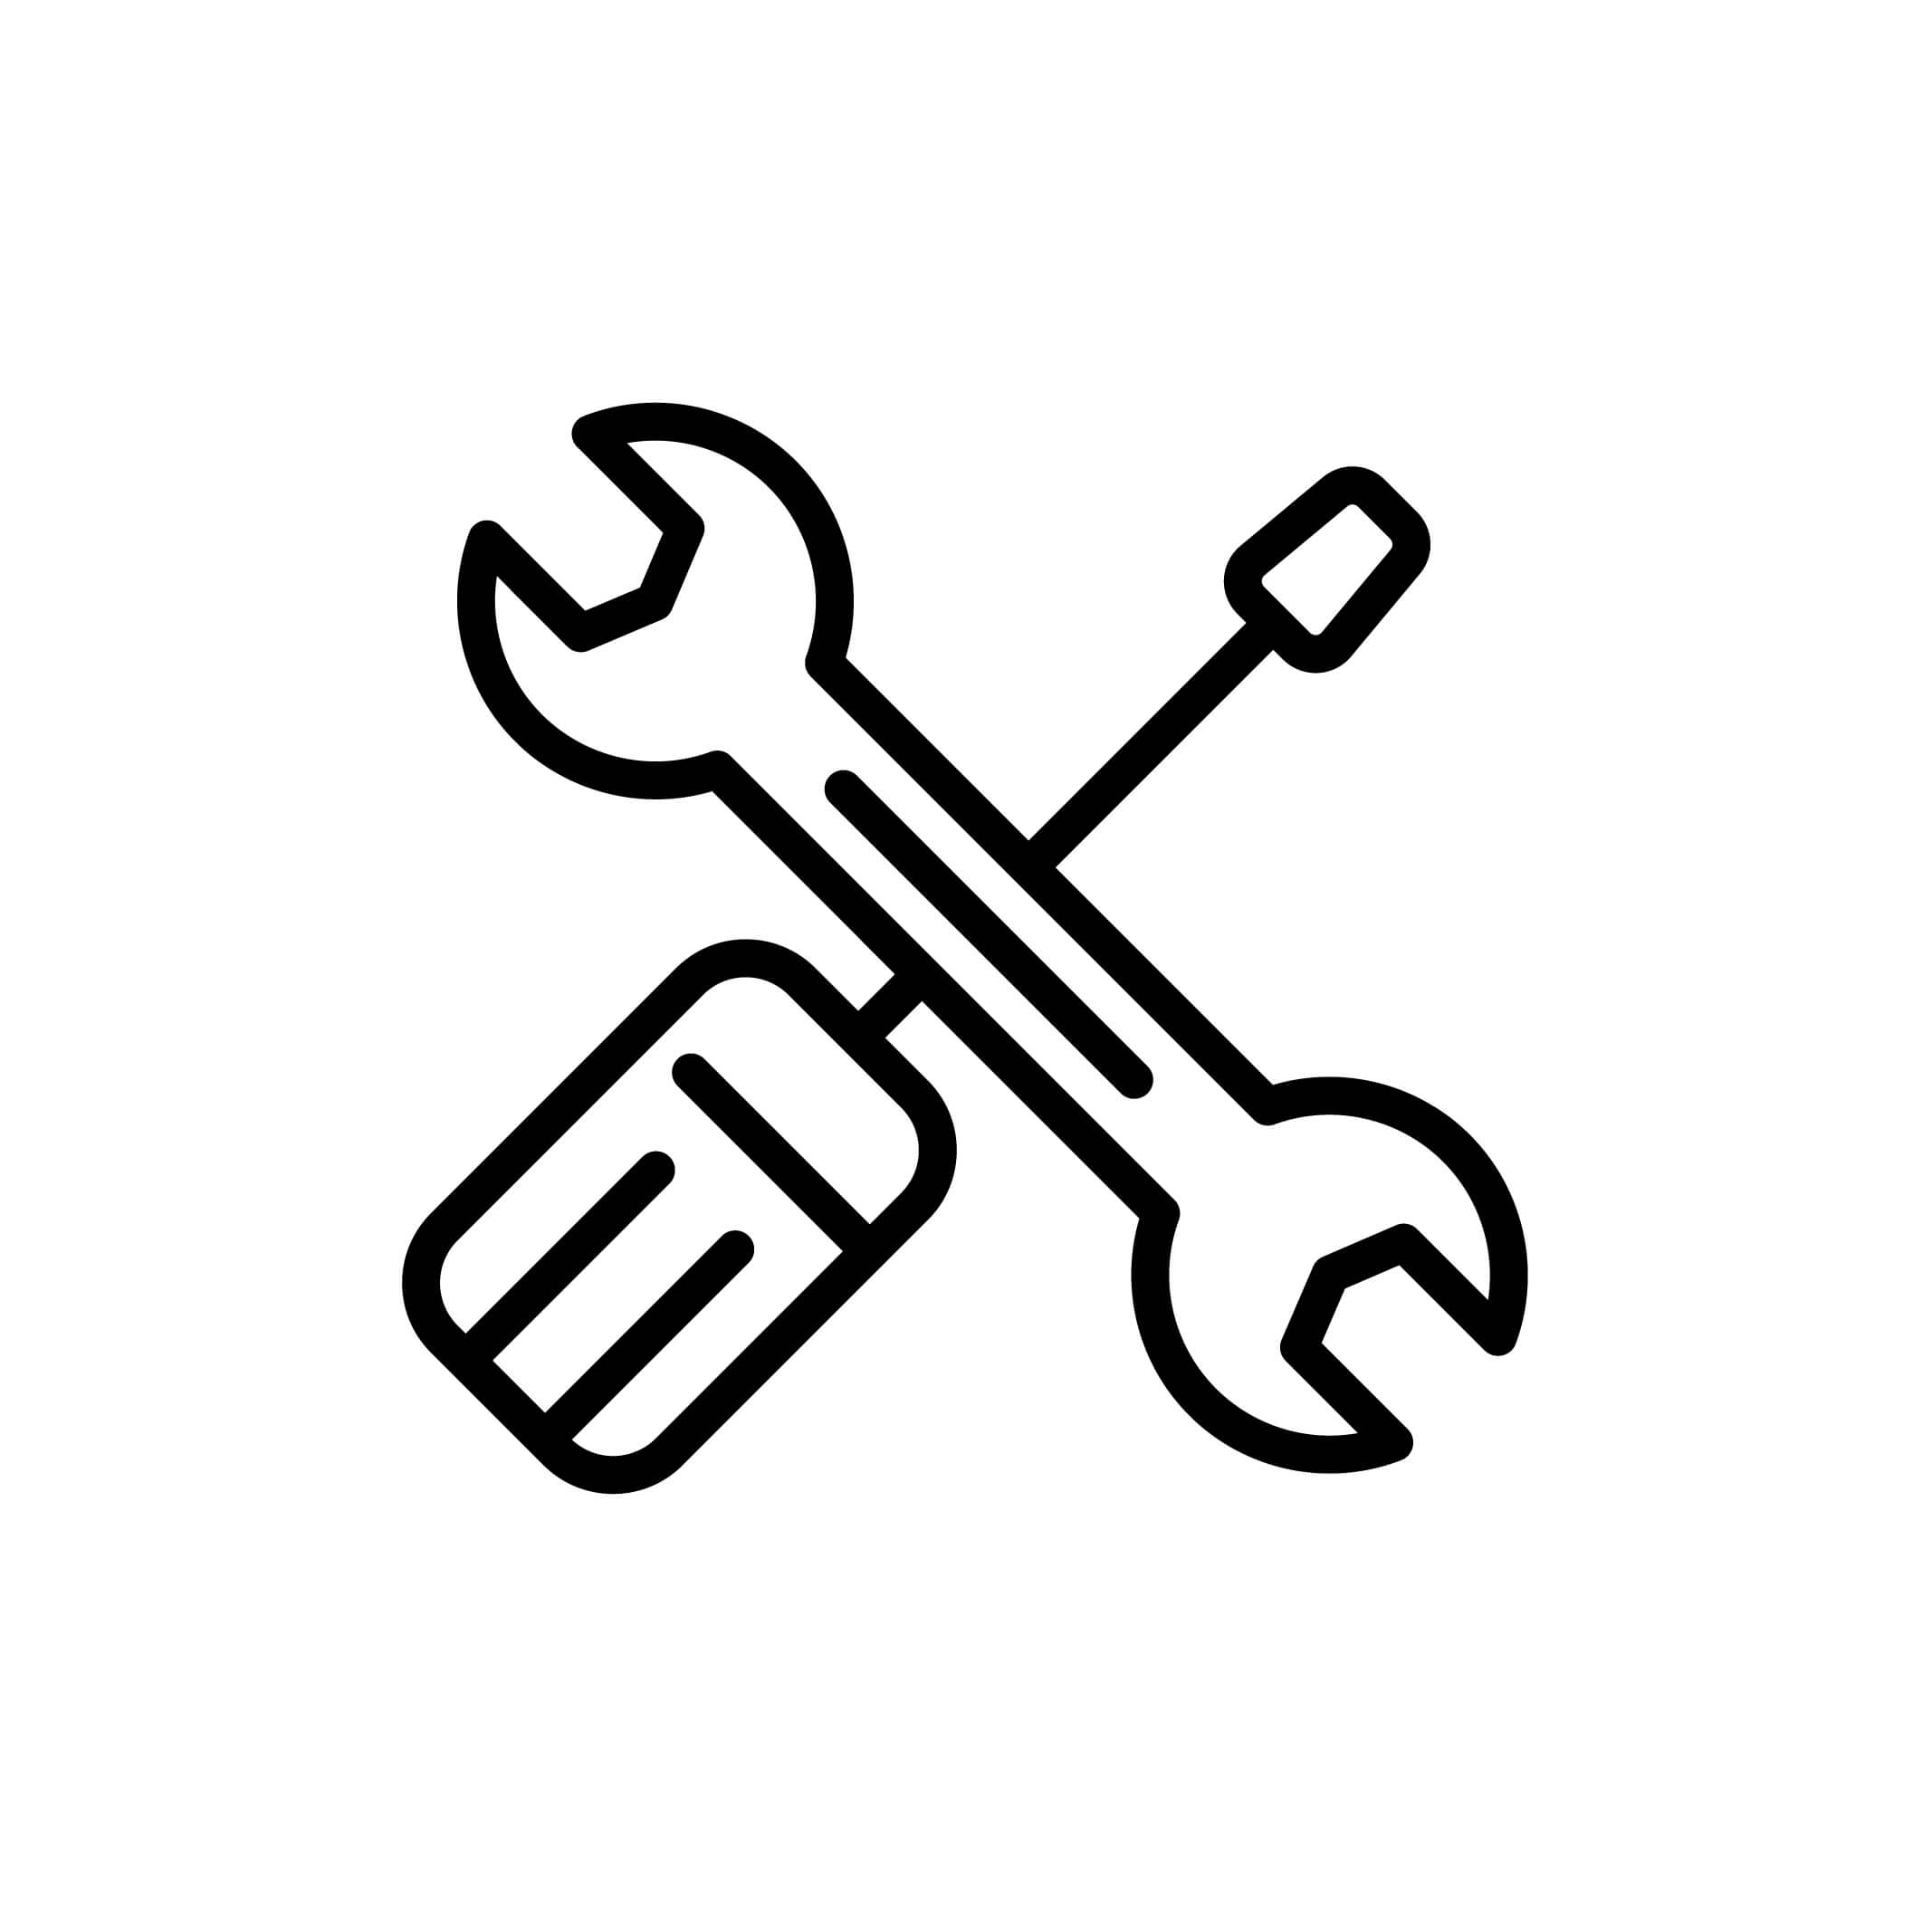 Spanner and screwdriver icon